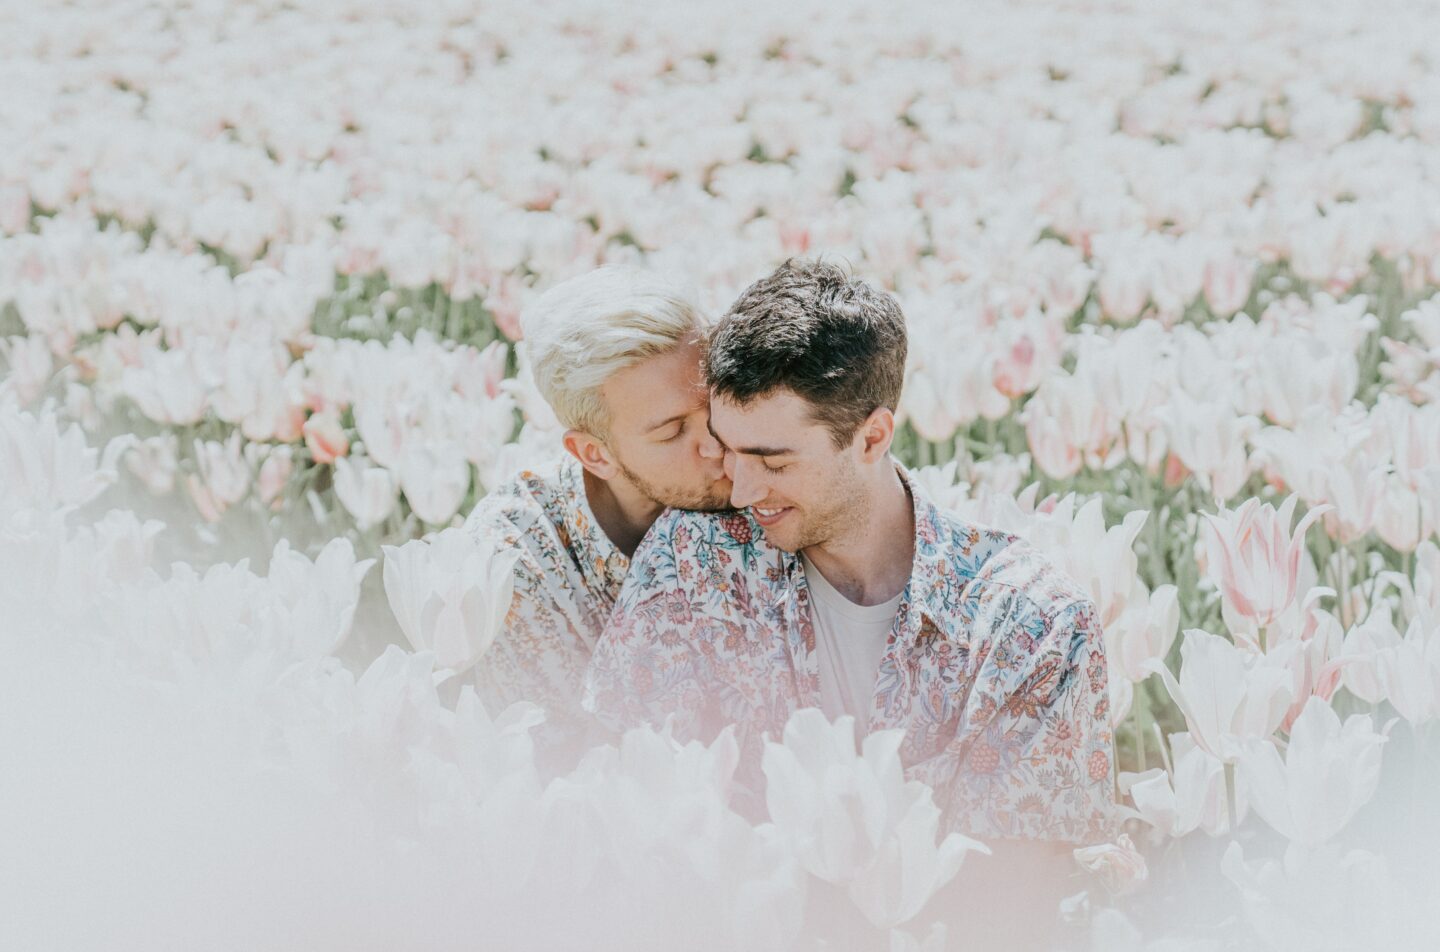 Spring Engagement Photoshoot: Eight Tips And Outfit Ideas For Couples